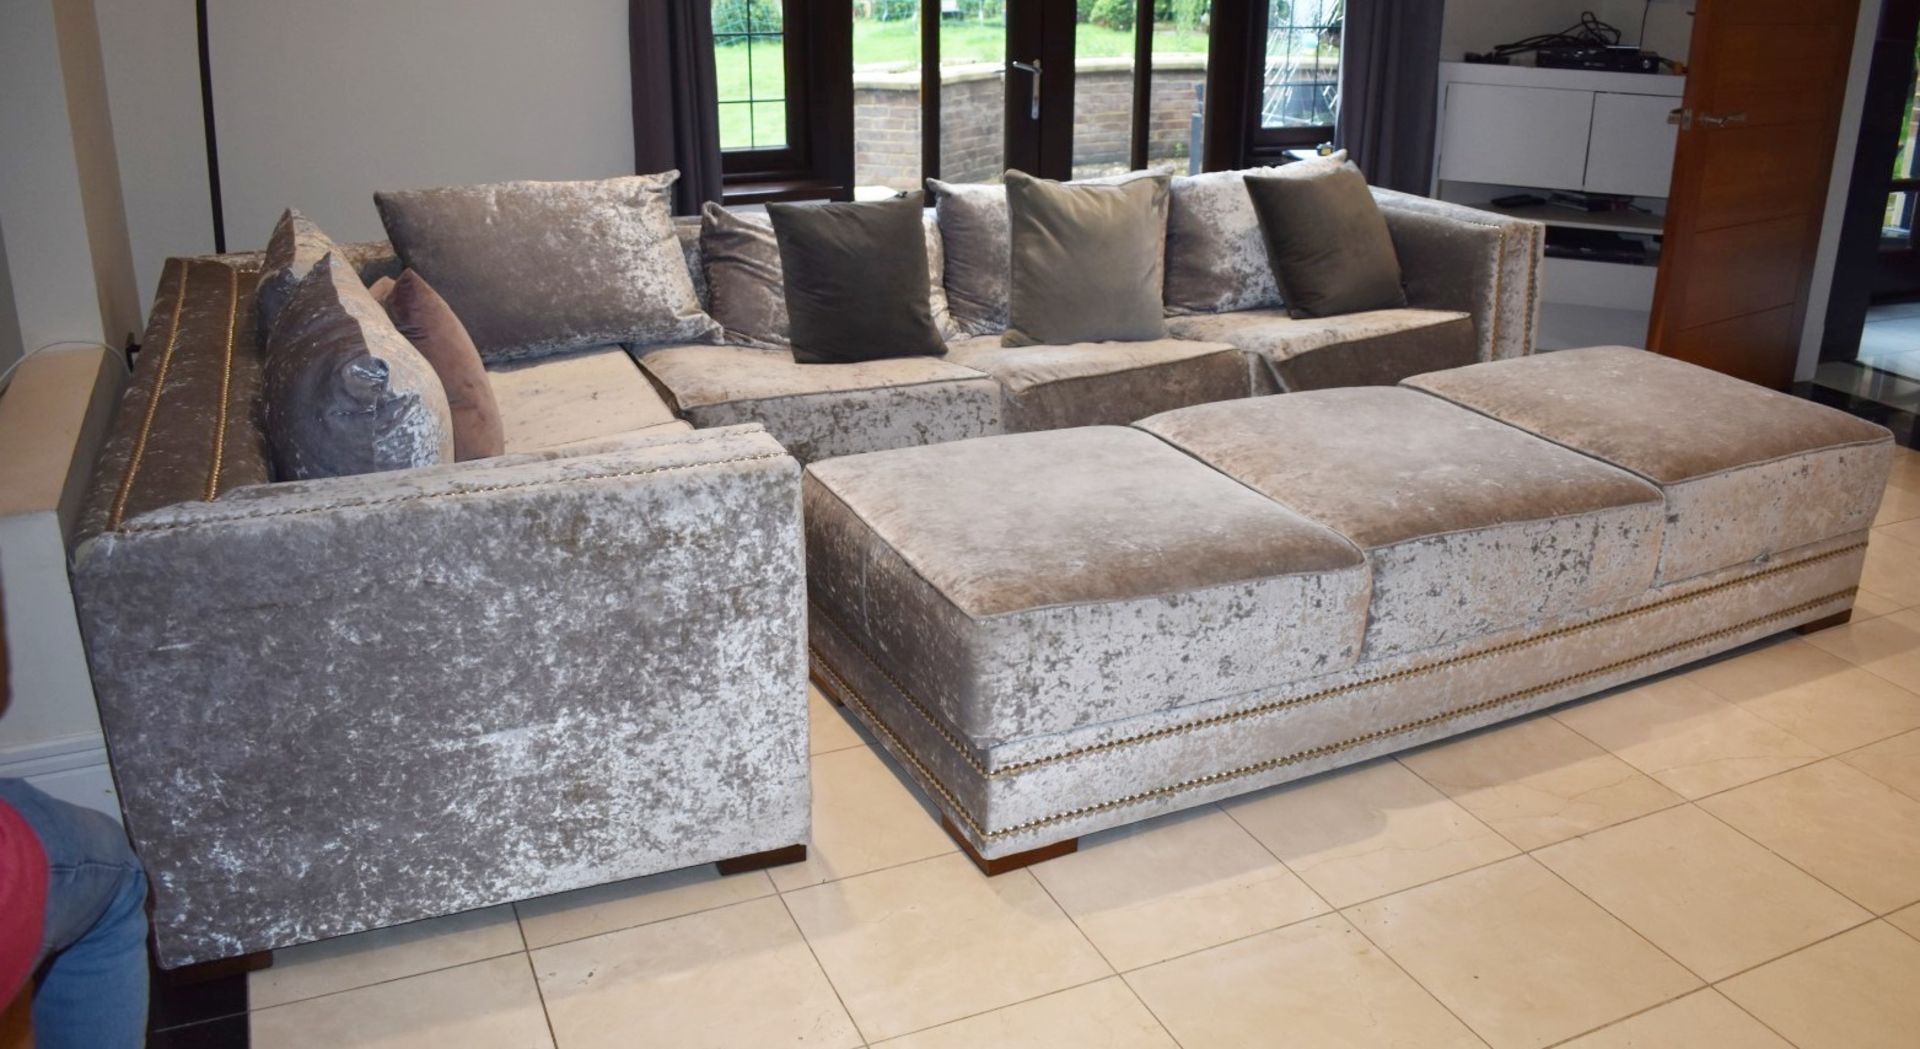 1 x Bespoke Handcrafted Corner Sofa With Ottoman Storage Footstool - Image 11 of 15